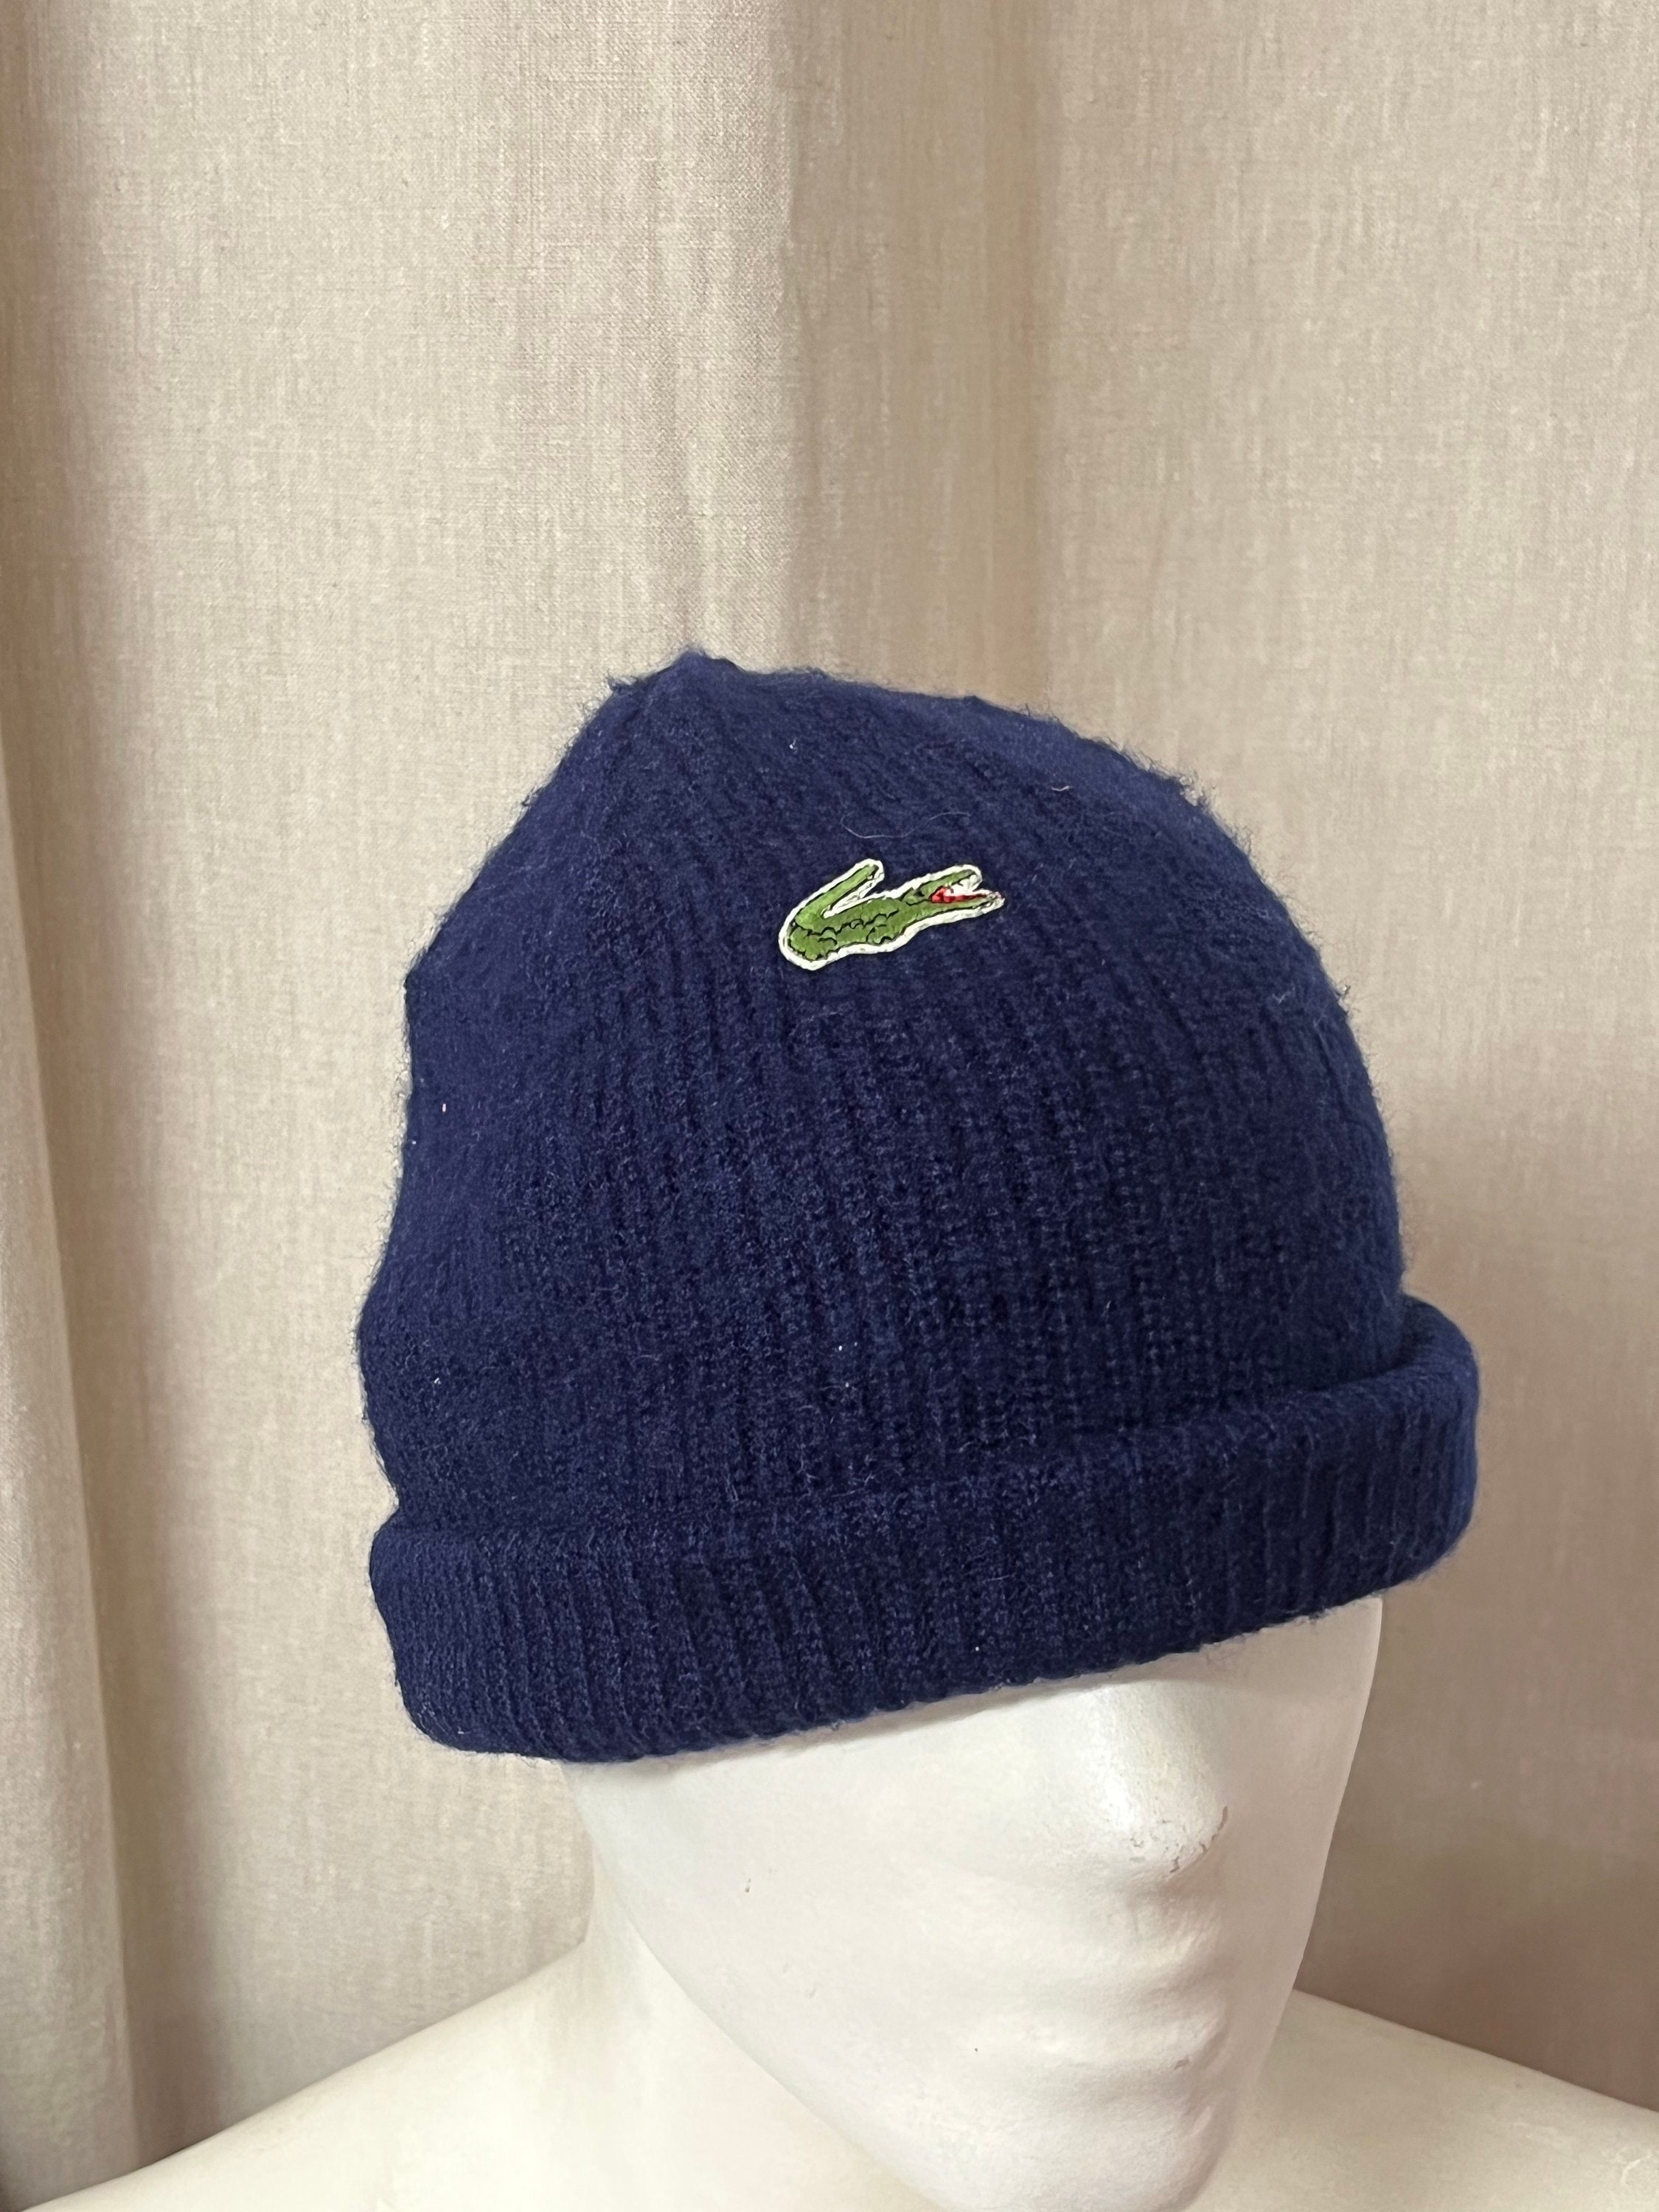 Vintage Vintage Chemise Lacoste Blue Beanie Hat Made in France - Etsy